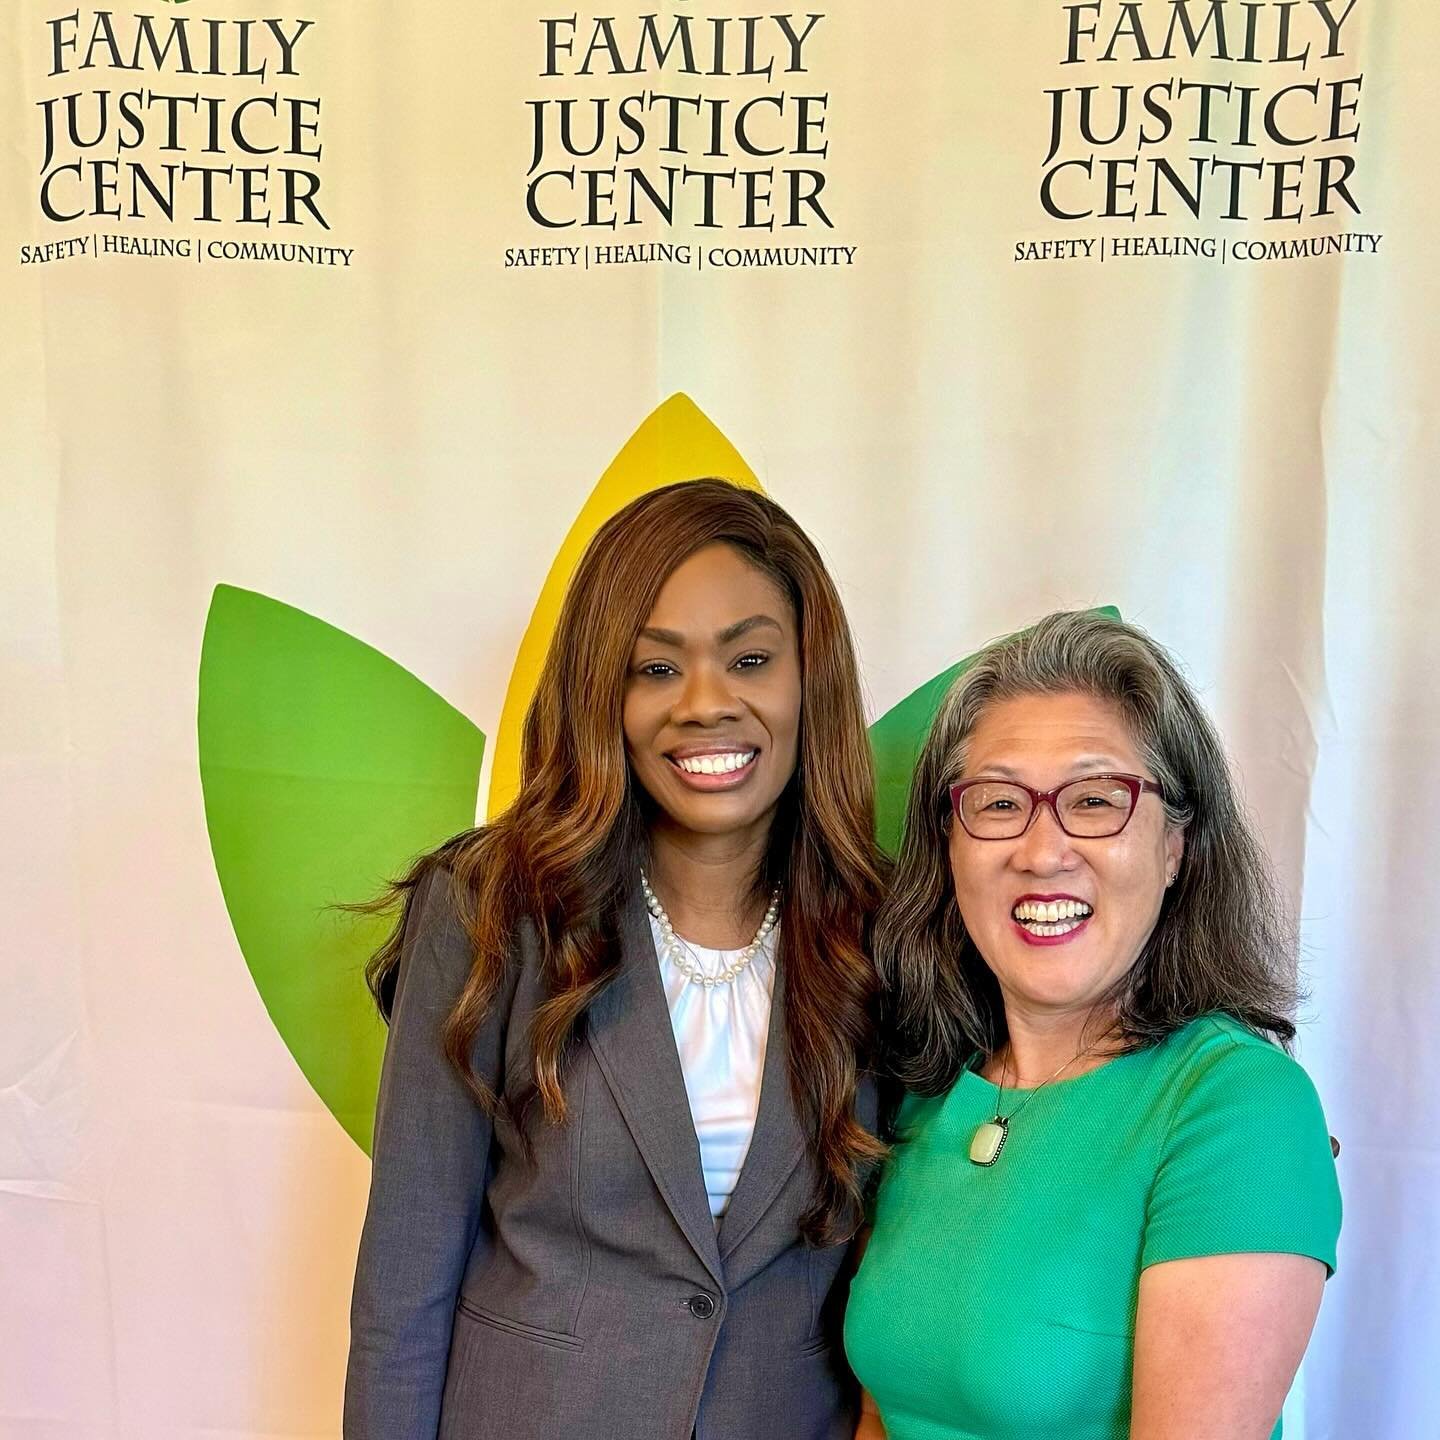 Had an amazing time at the Contra Costa Family Justice Alliance Annual Building Safety Through Community fundraising! The theme of &ldquo;following your joy wherever it may take you&rdquo; made for a fantastic evening of celebration, community connec